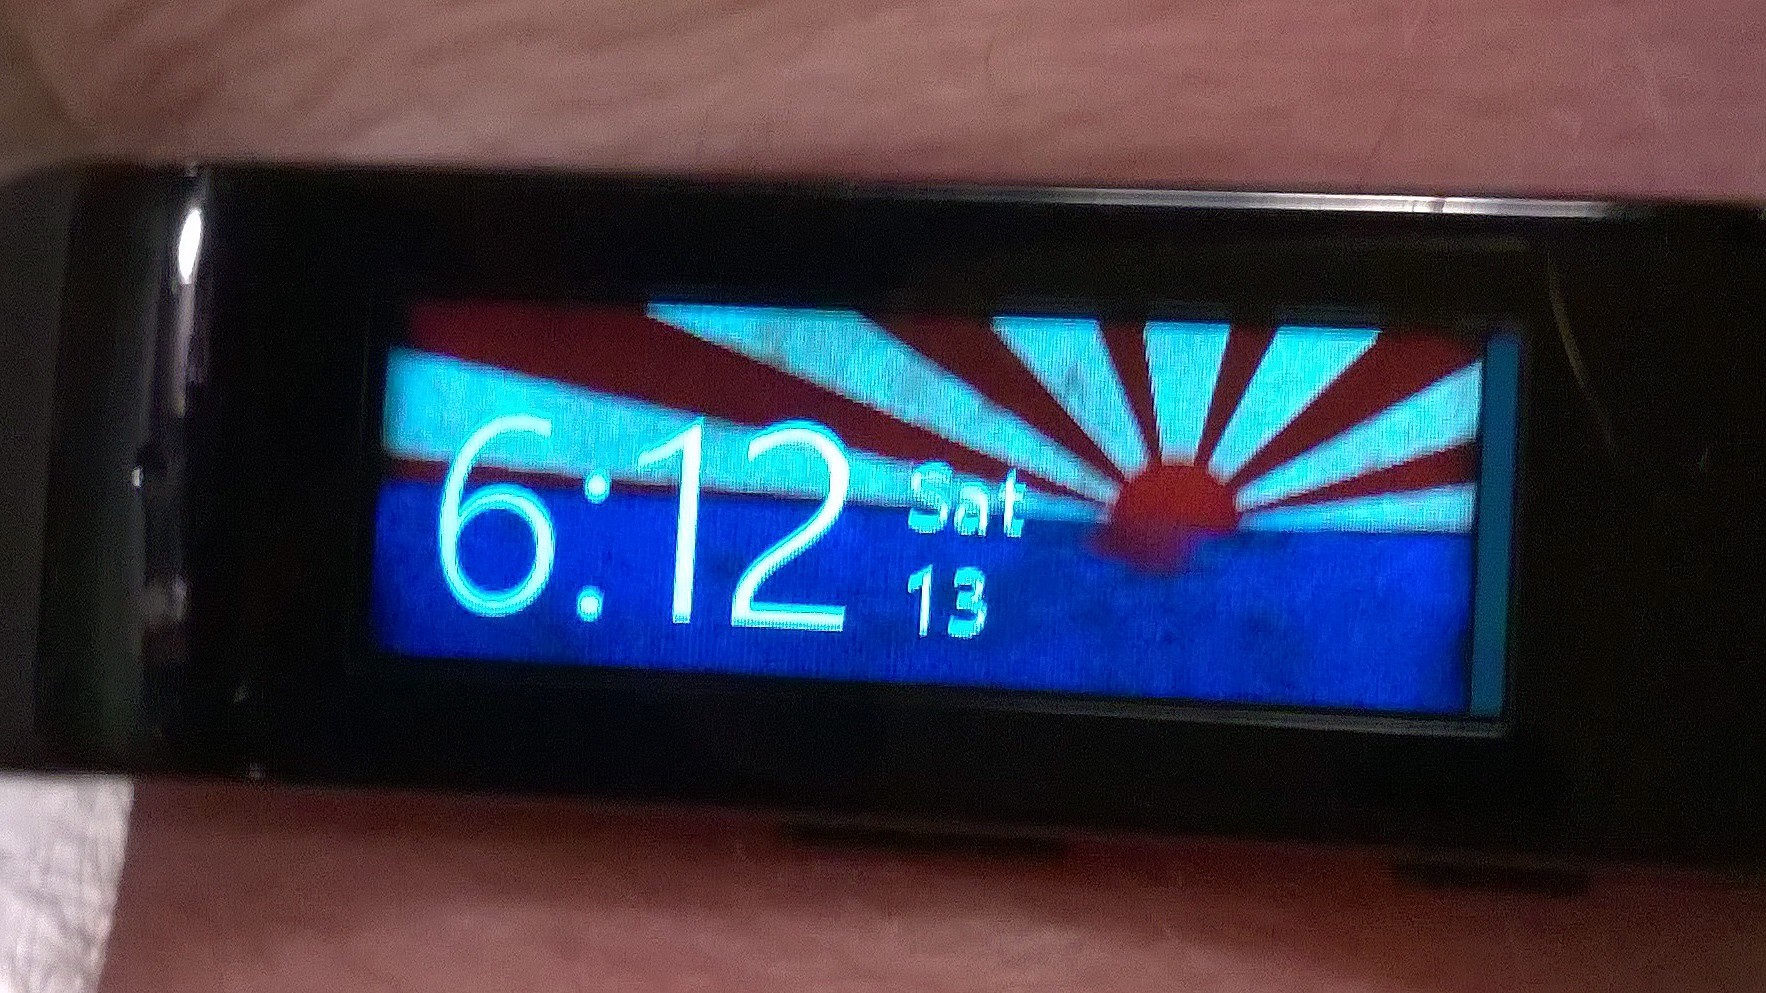 Change Your Microsoft Band Wallpaper With Pimp My For Windows